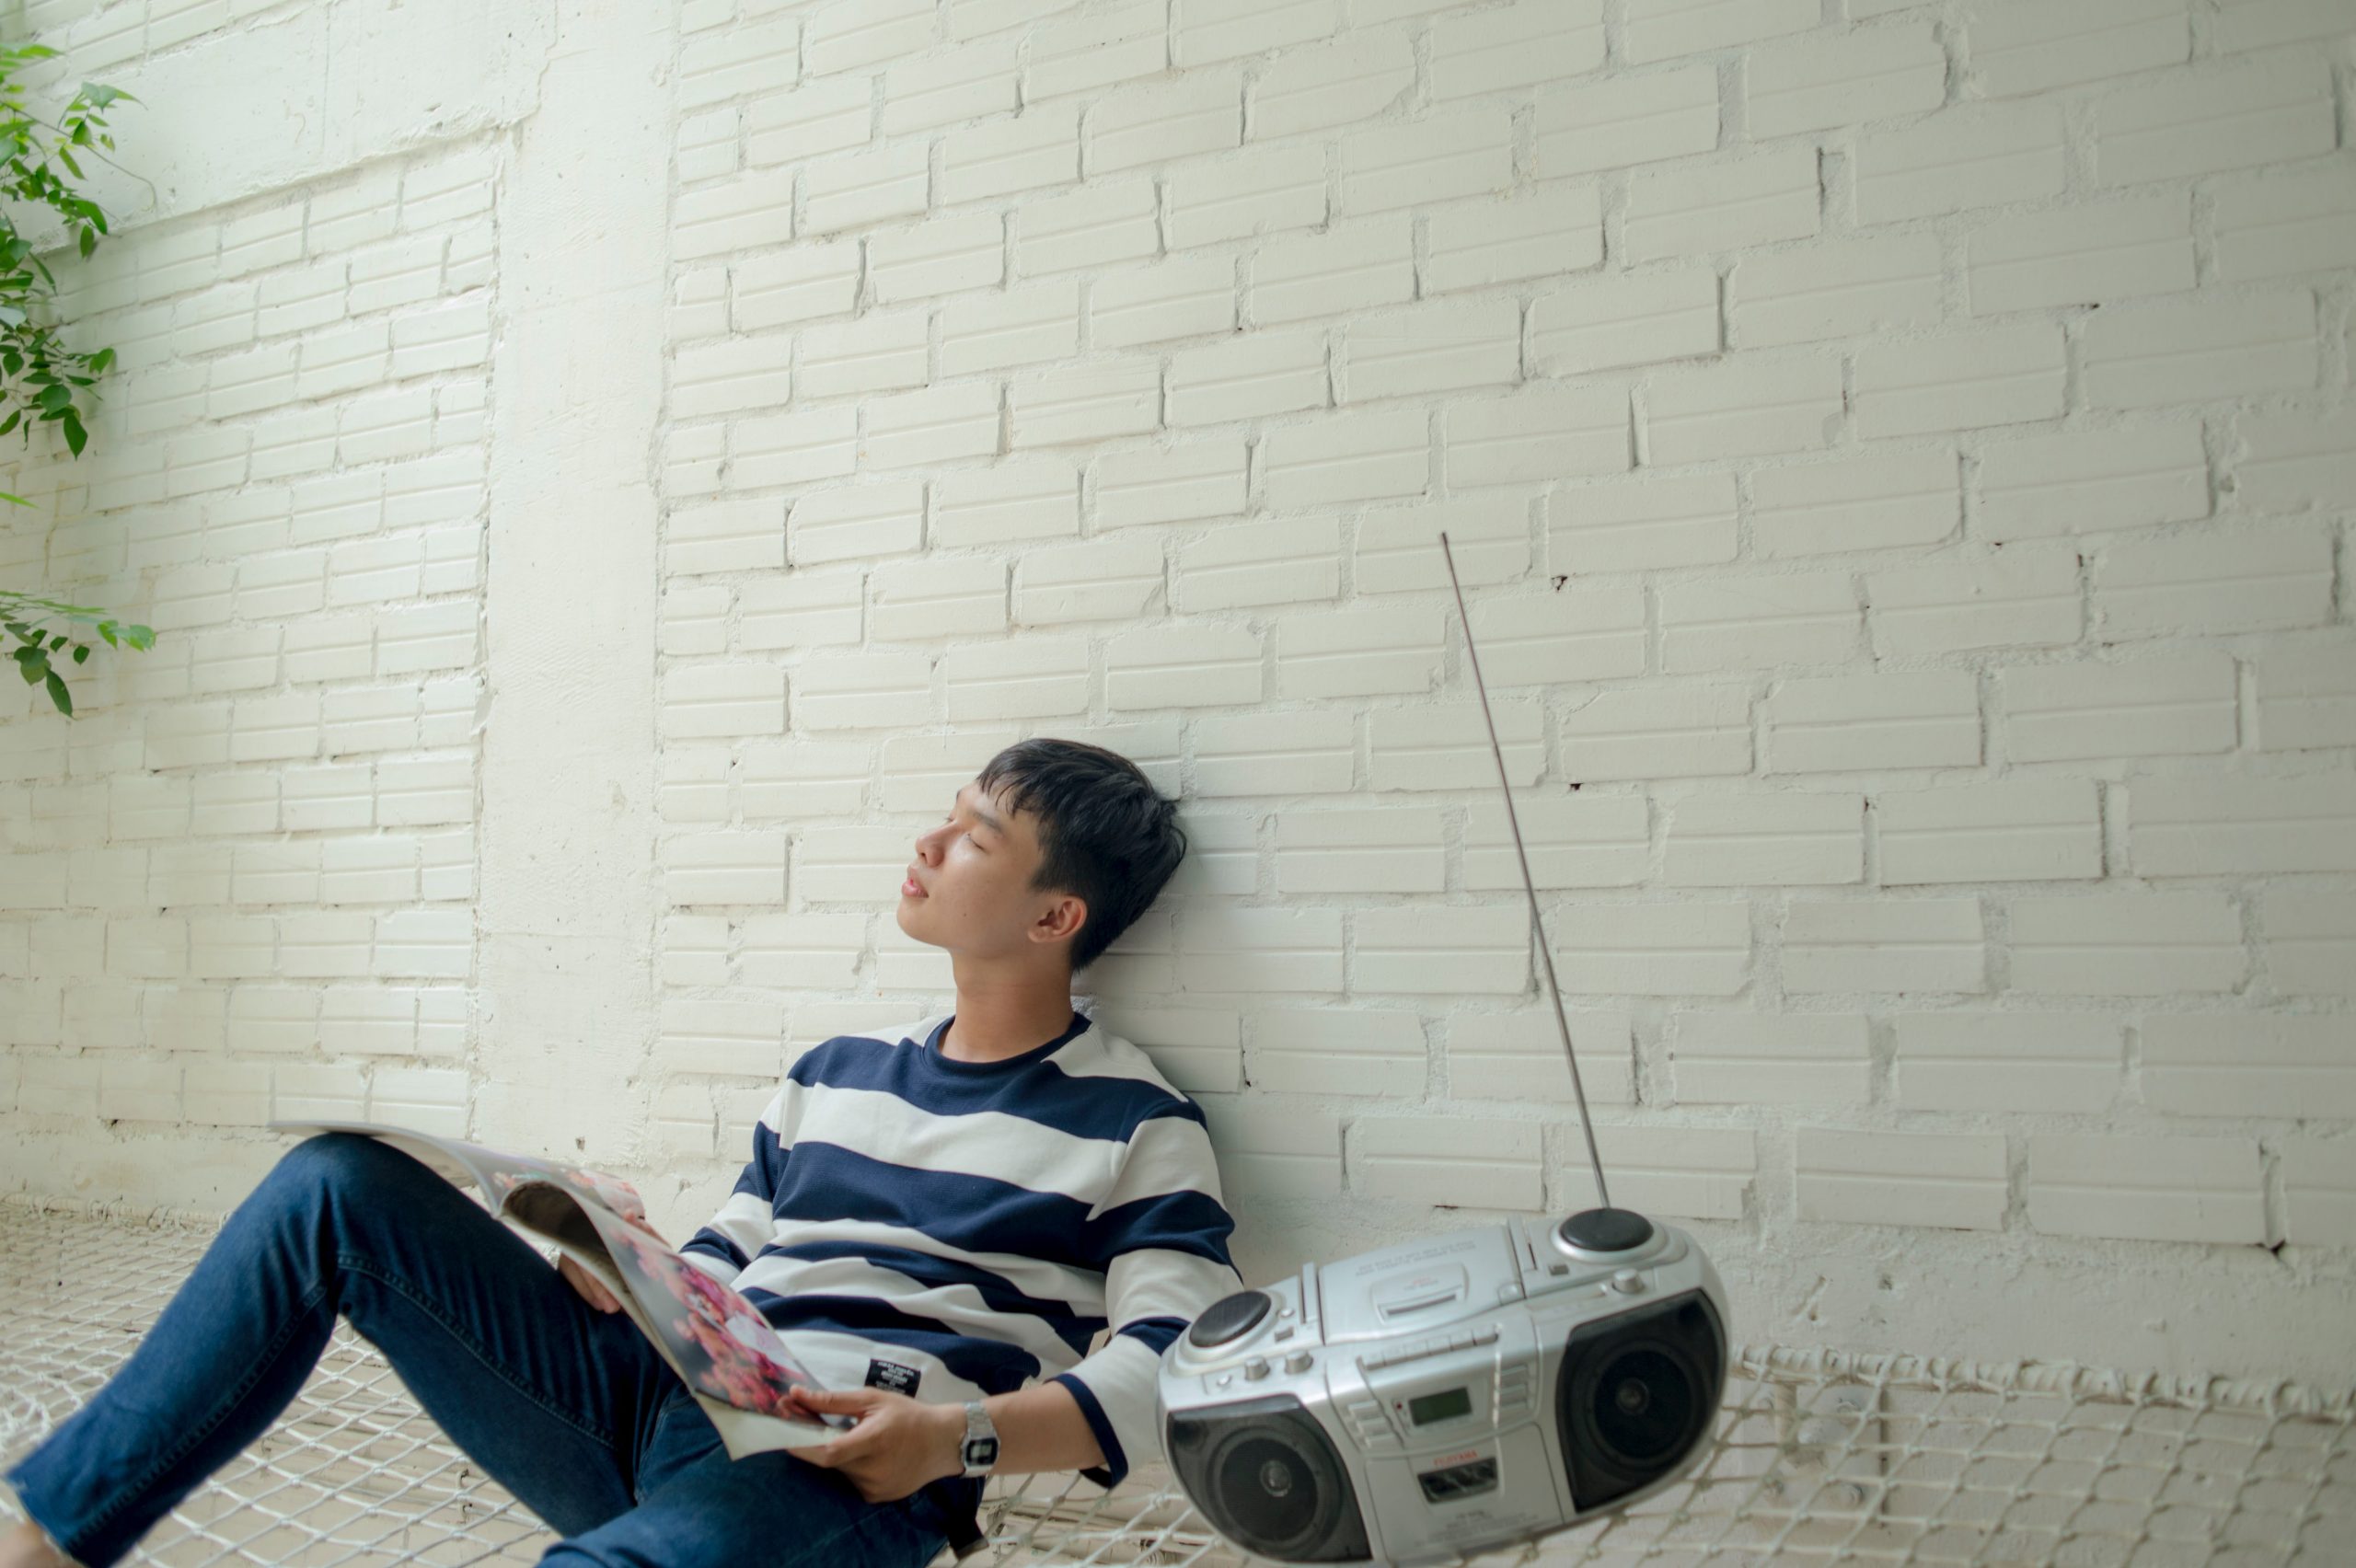 A man sitting against a brick wall holding a vinyl record. A radio and CD player rests next to him.